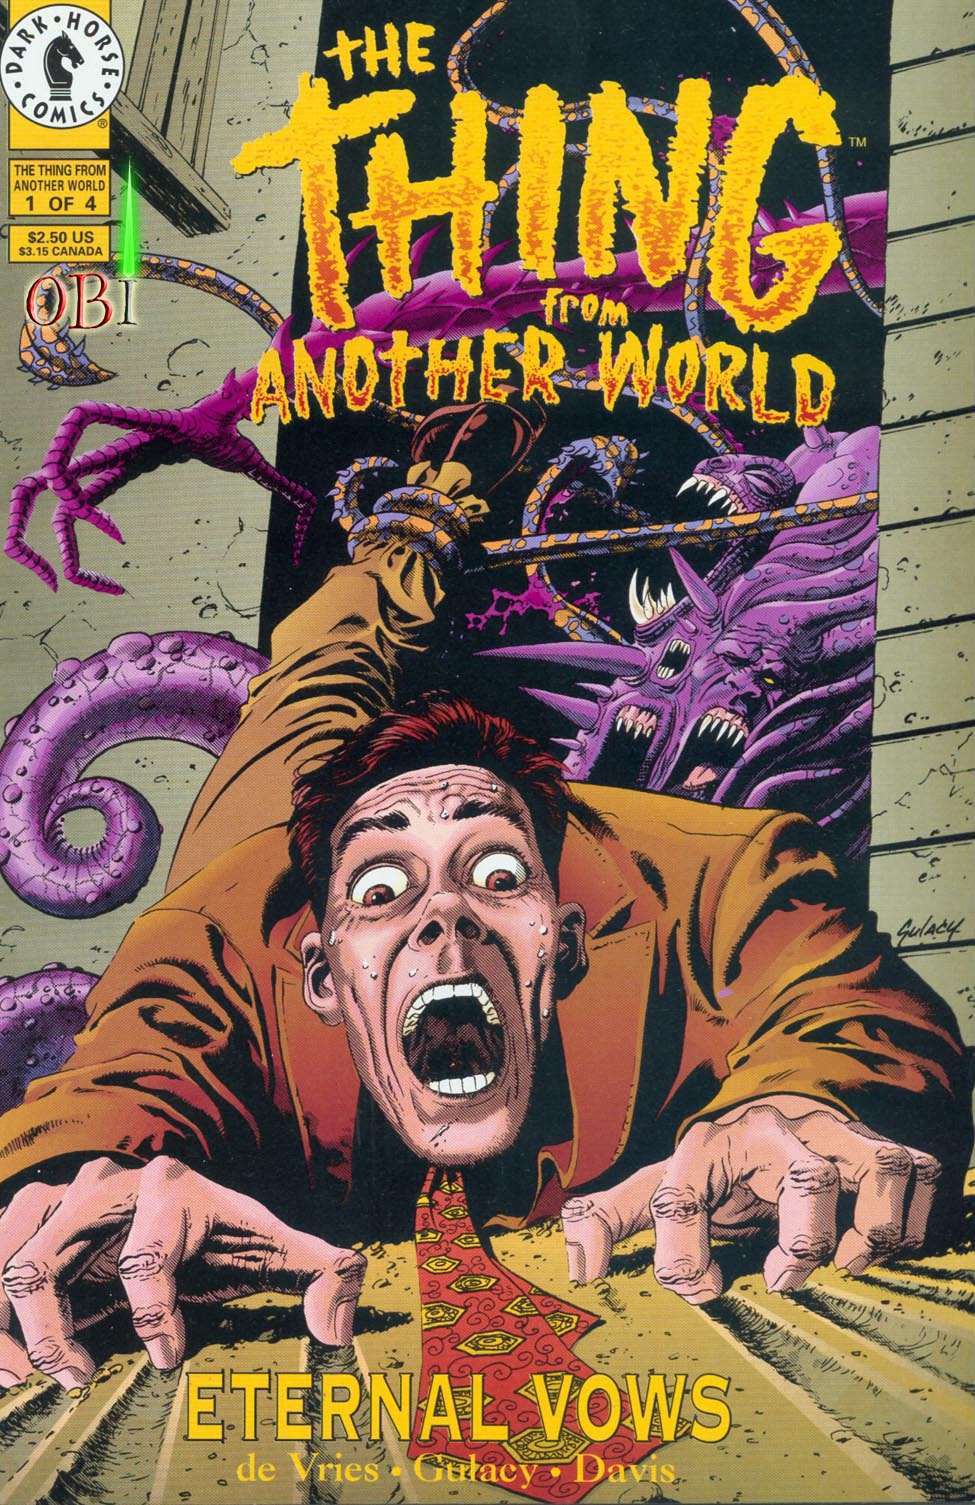 The 1 thing book. The thing from another World: Eternal Vows.